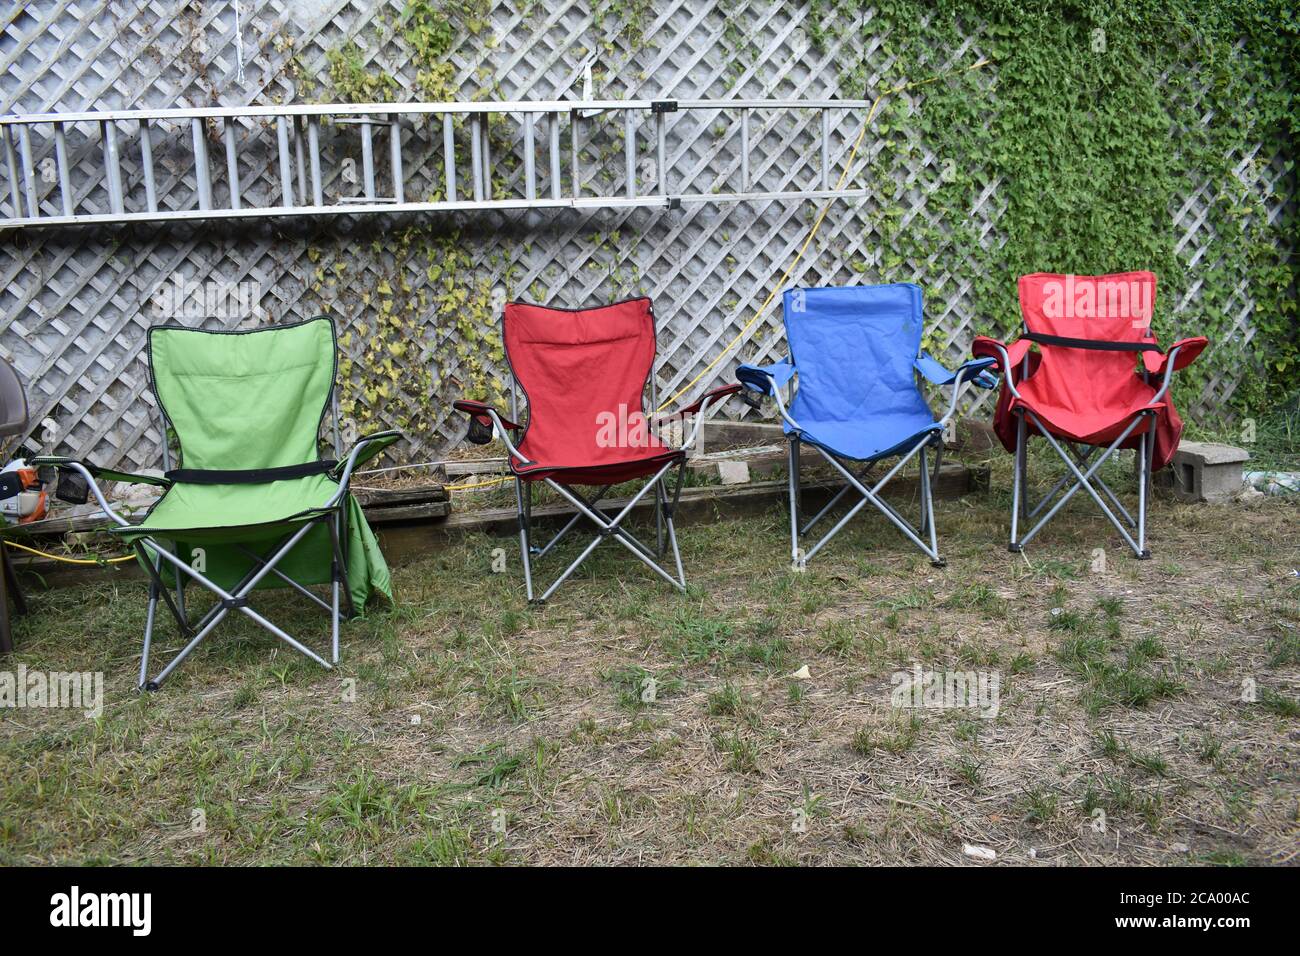 Four Lawn Chairs in a Yard Stock Photo